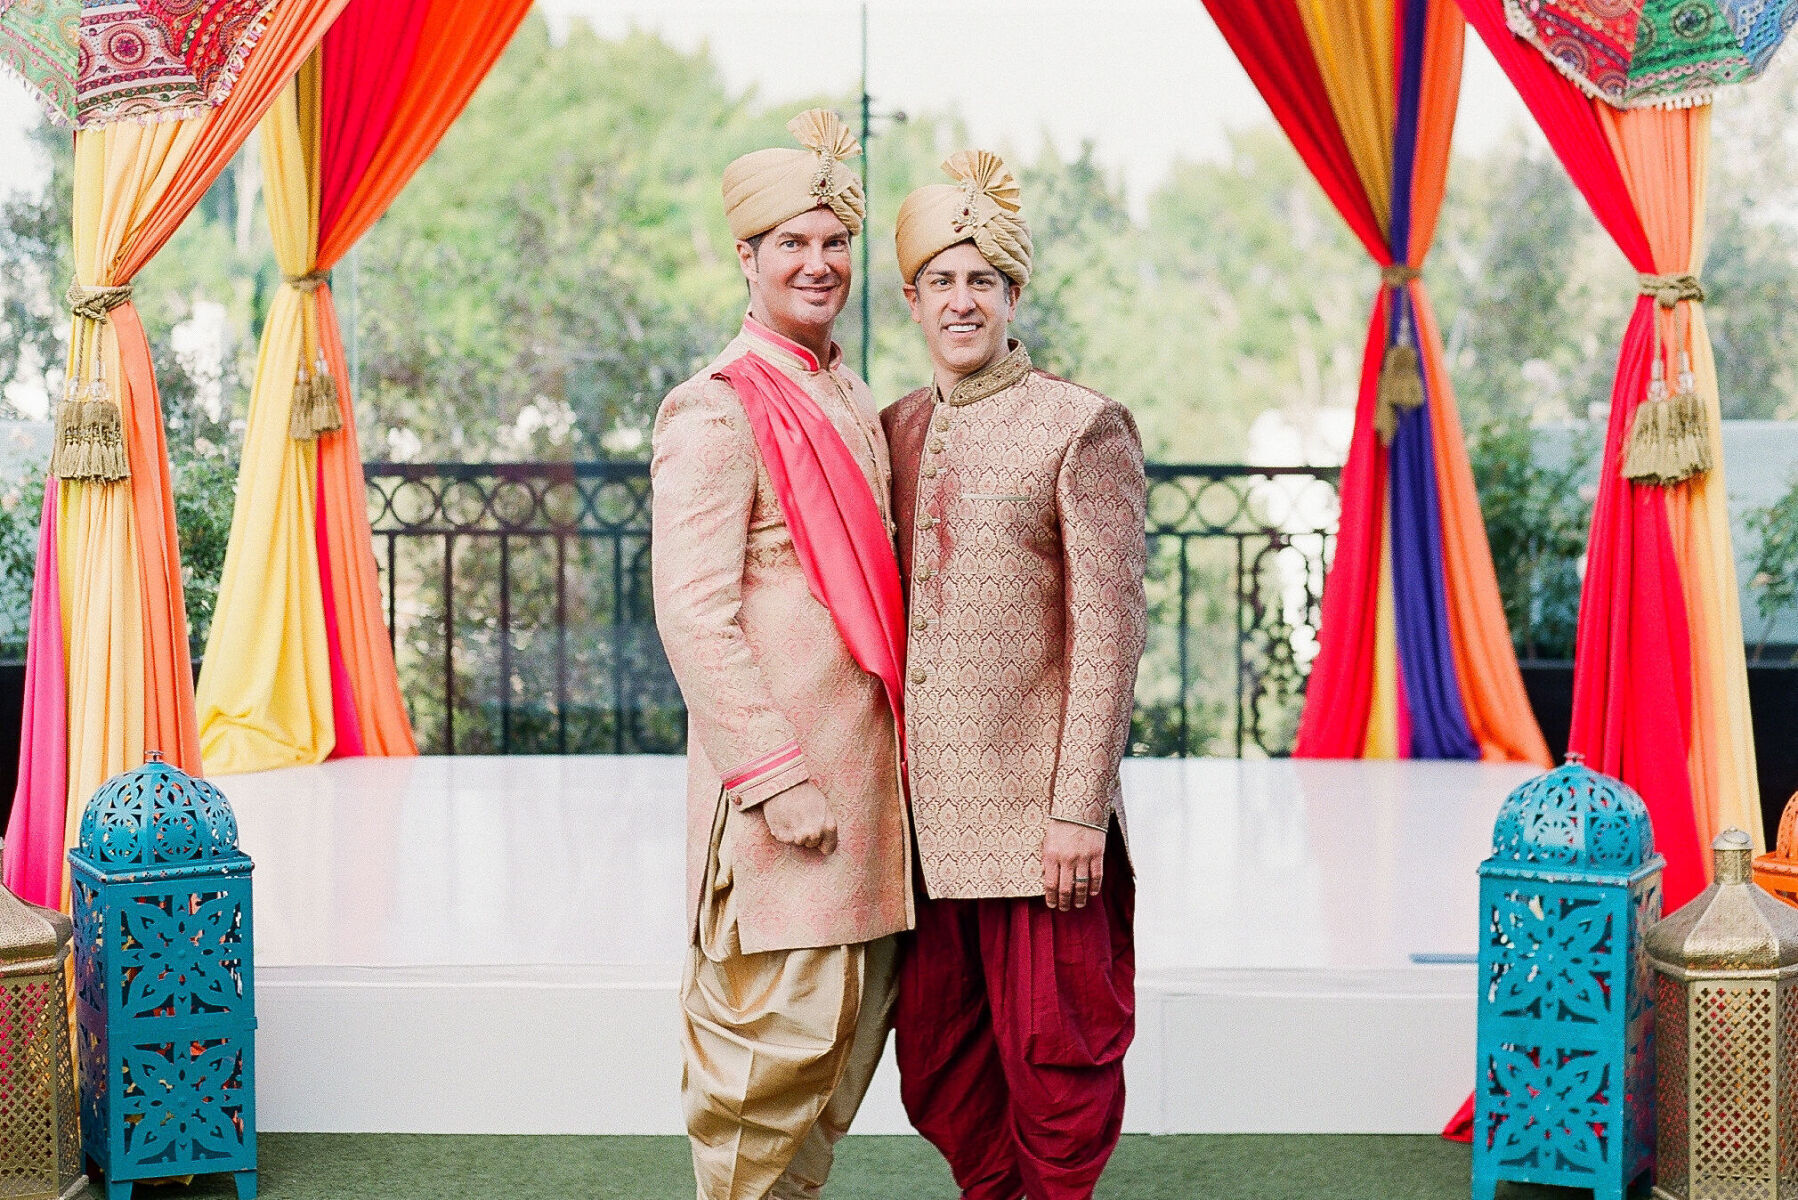 Wedding Traditions: Two grooms wearing traditional Indian attire.